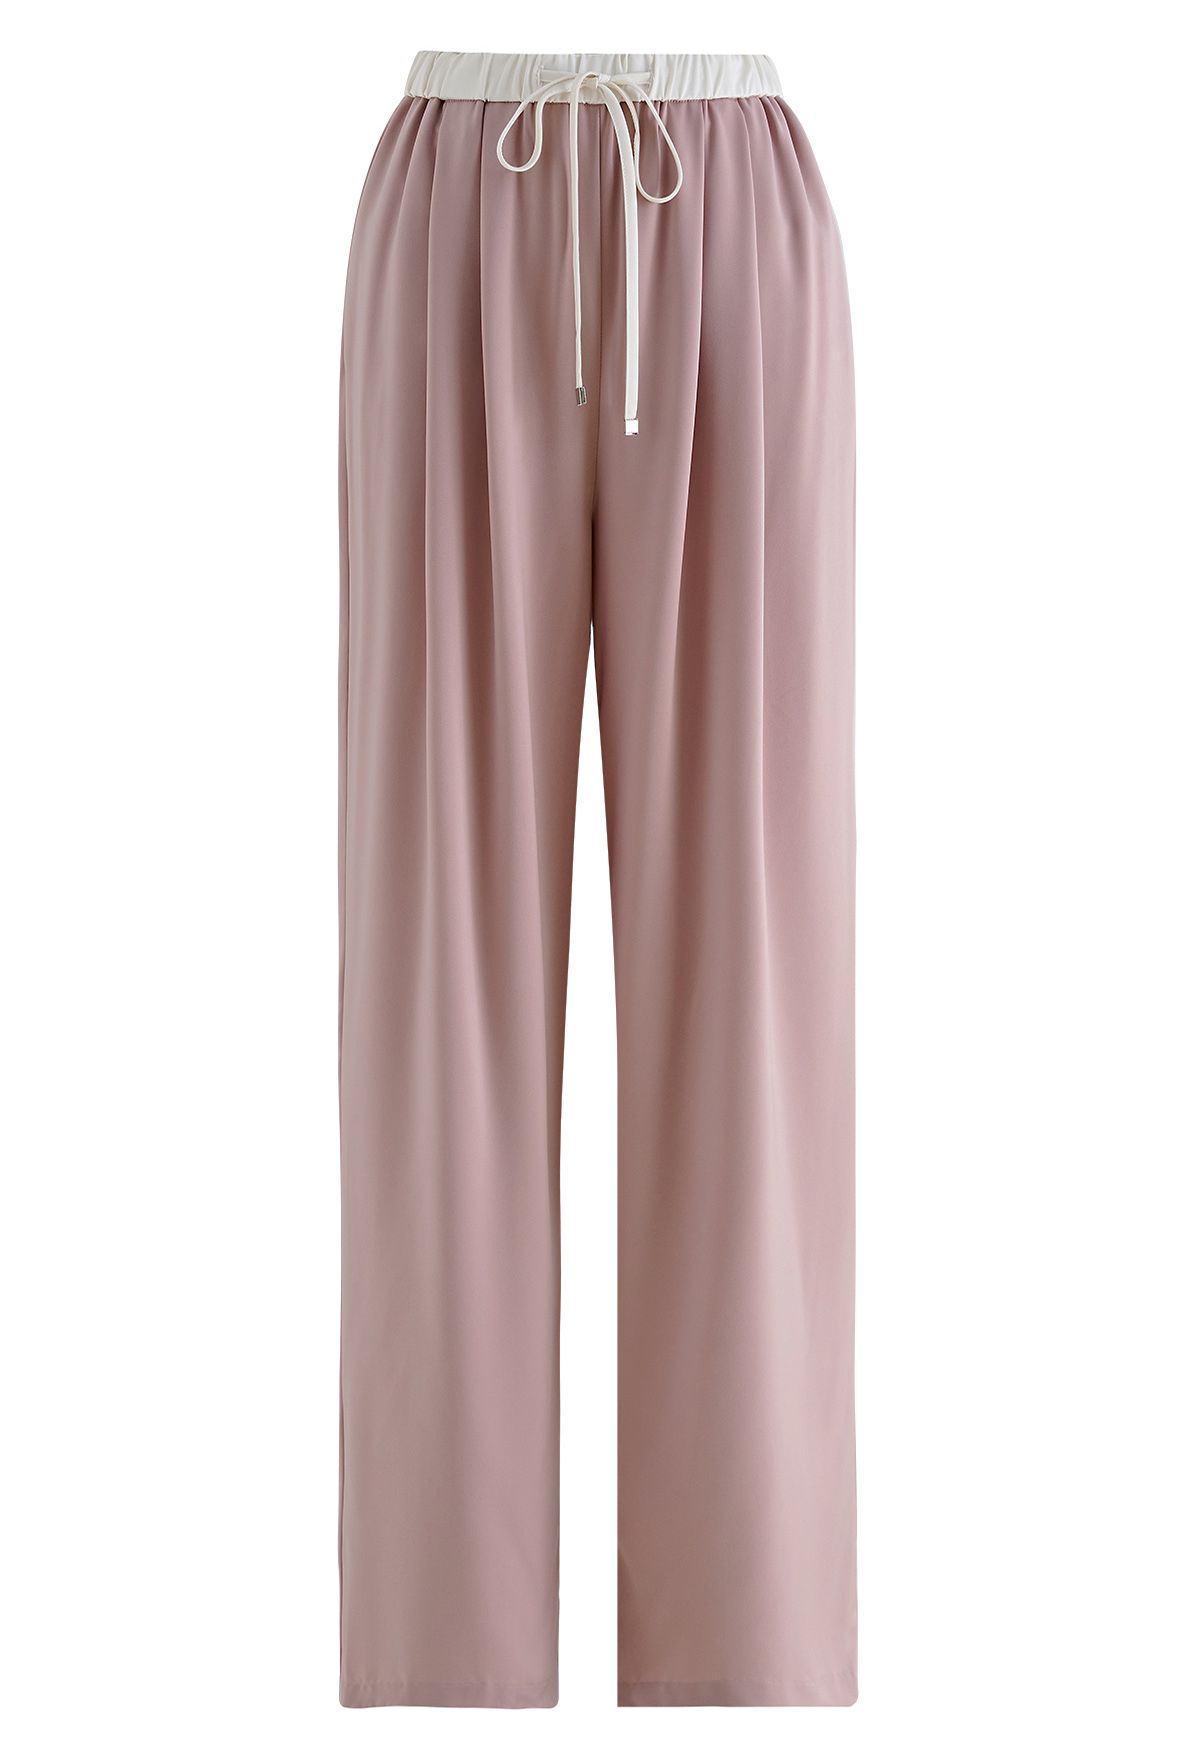 Contrast Waist Satin Pleated Straight-Leg Pants in Pink - Retro, Indie ...